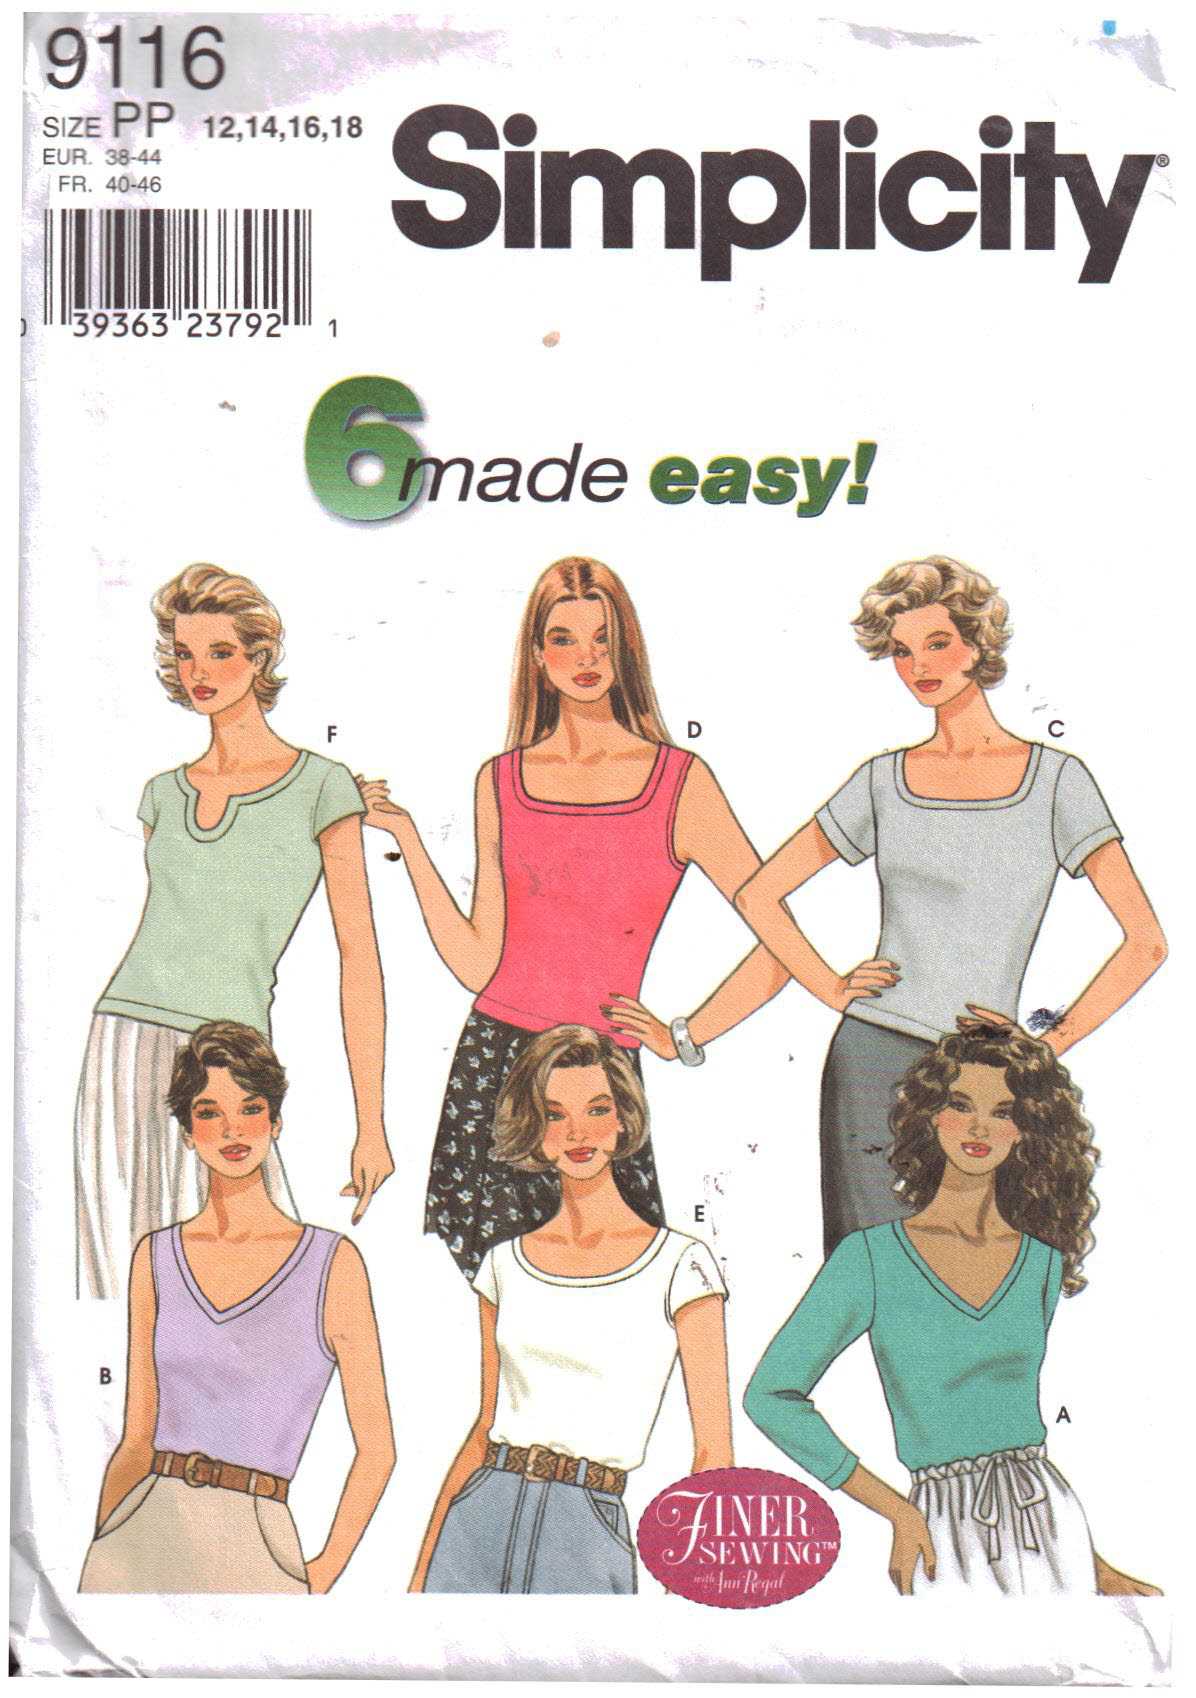 Simplicity 9116 Knit Tops Size PP 12-14-16-18 Used Sewing Pattern